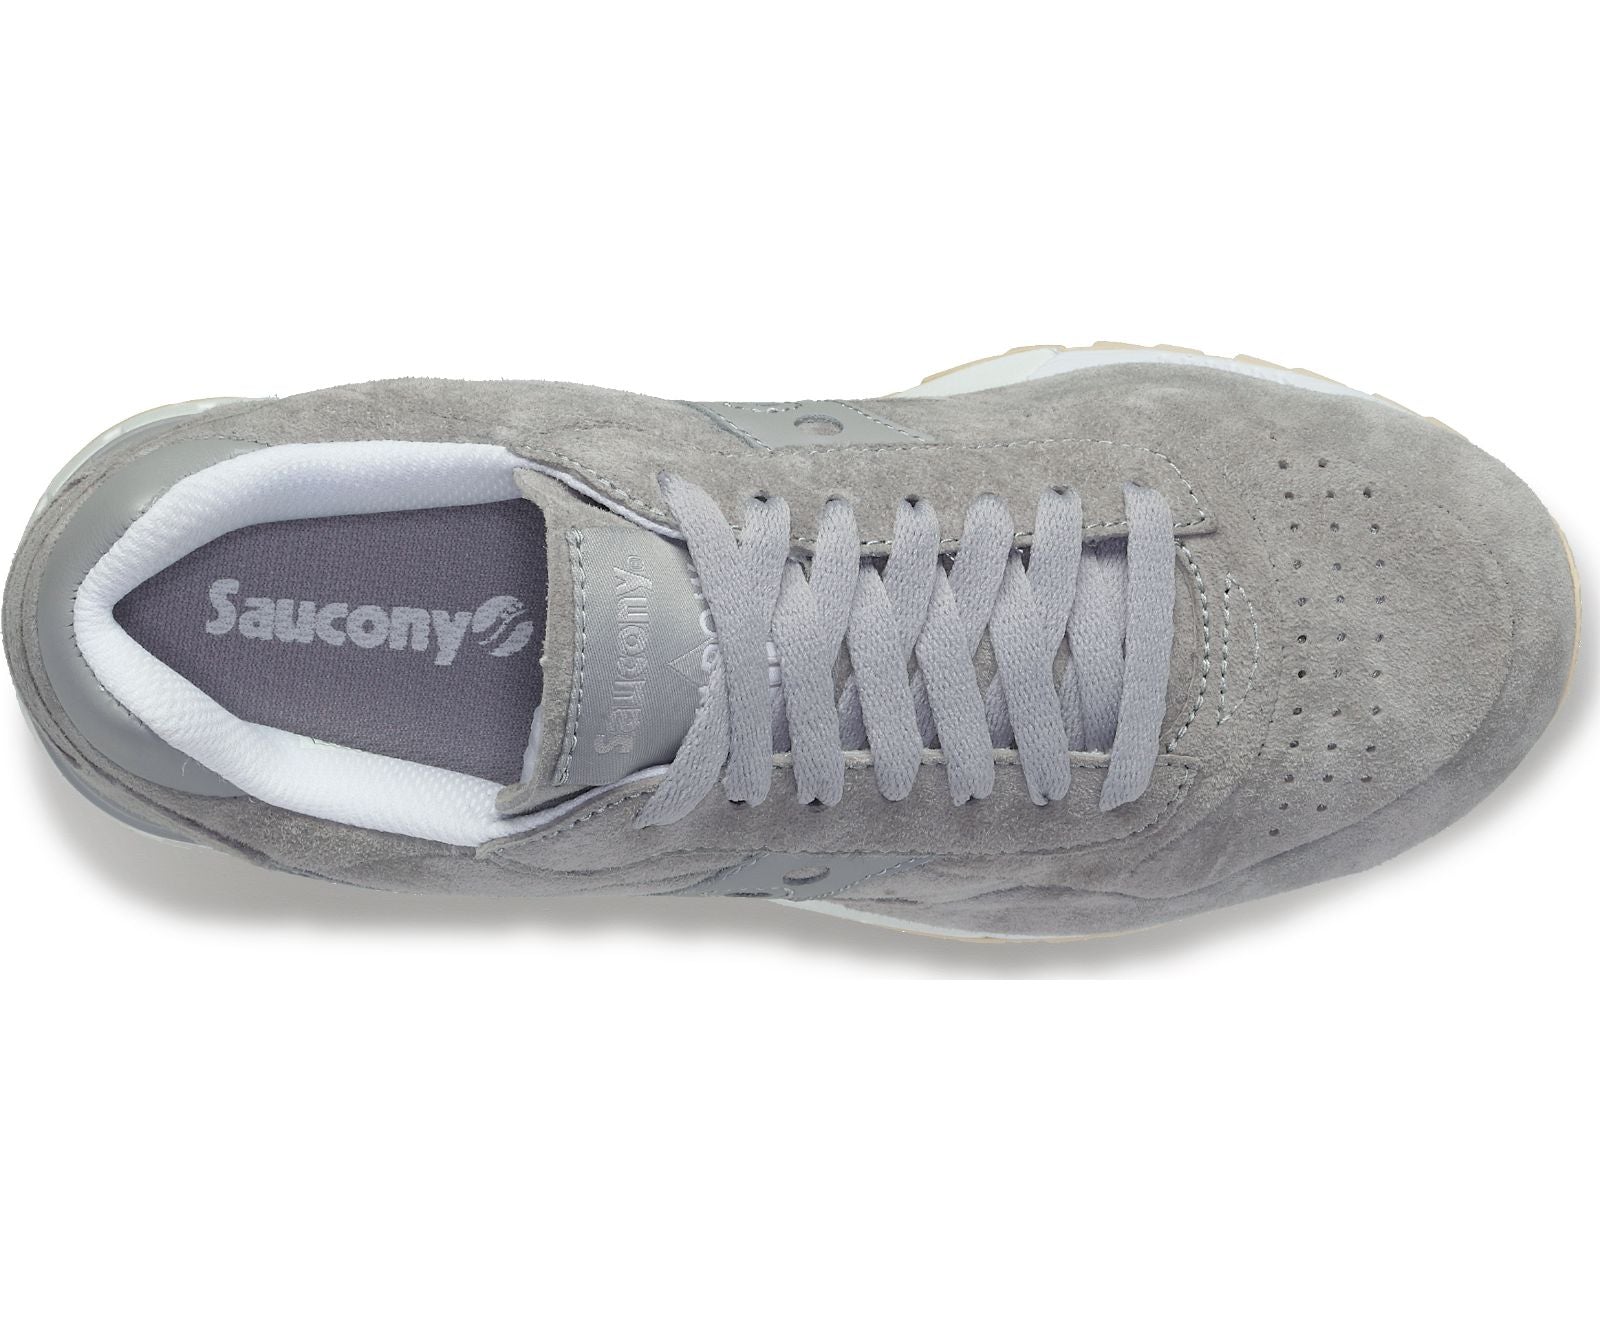 Top view of the Saucony Shadow 5000 Unisex lifestyle shoe in Grape